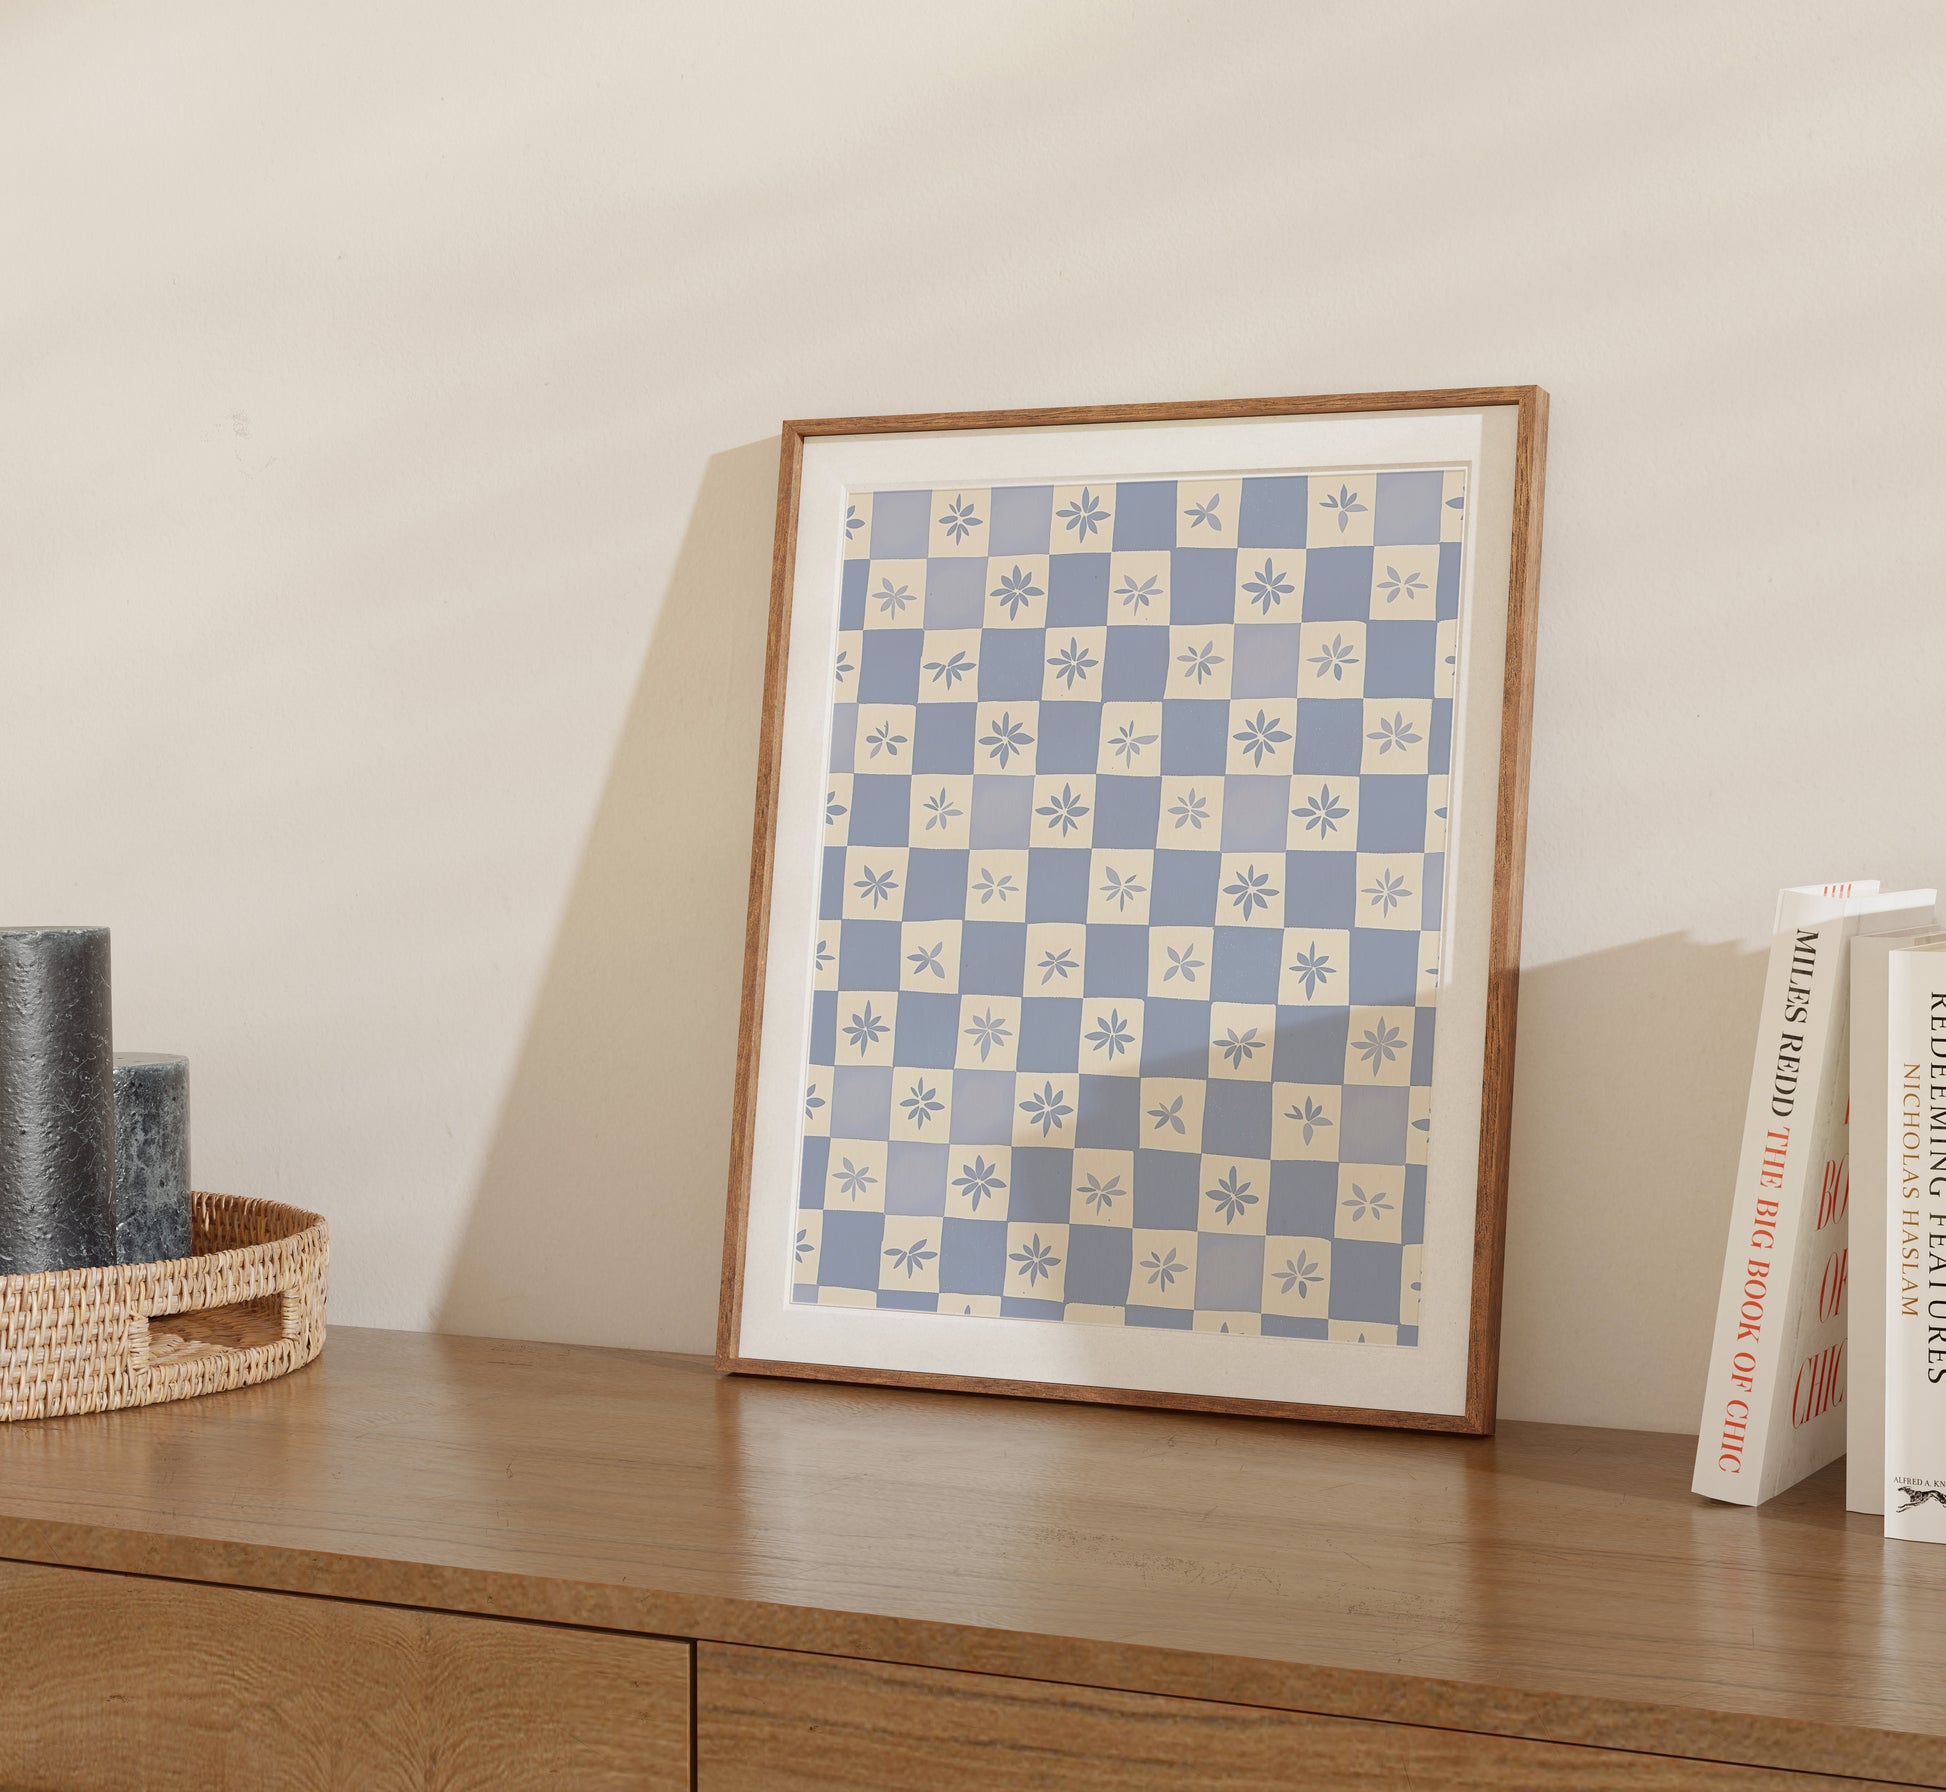 Framed geometric pattern artwork displayed on a wooden sideboard next to books and a basket.